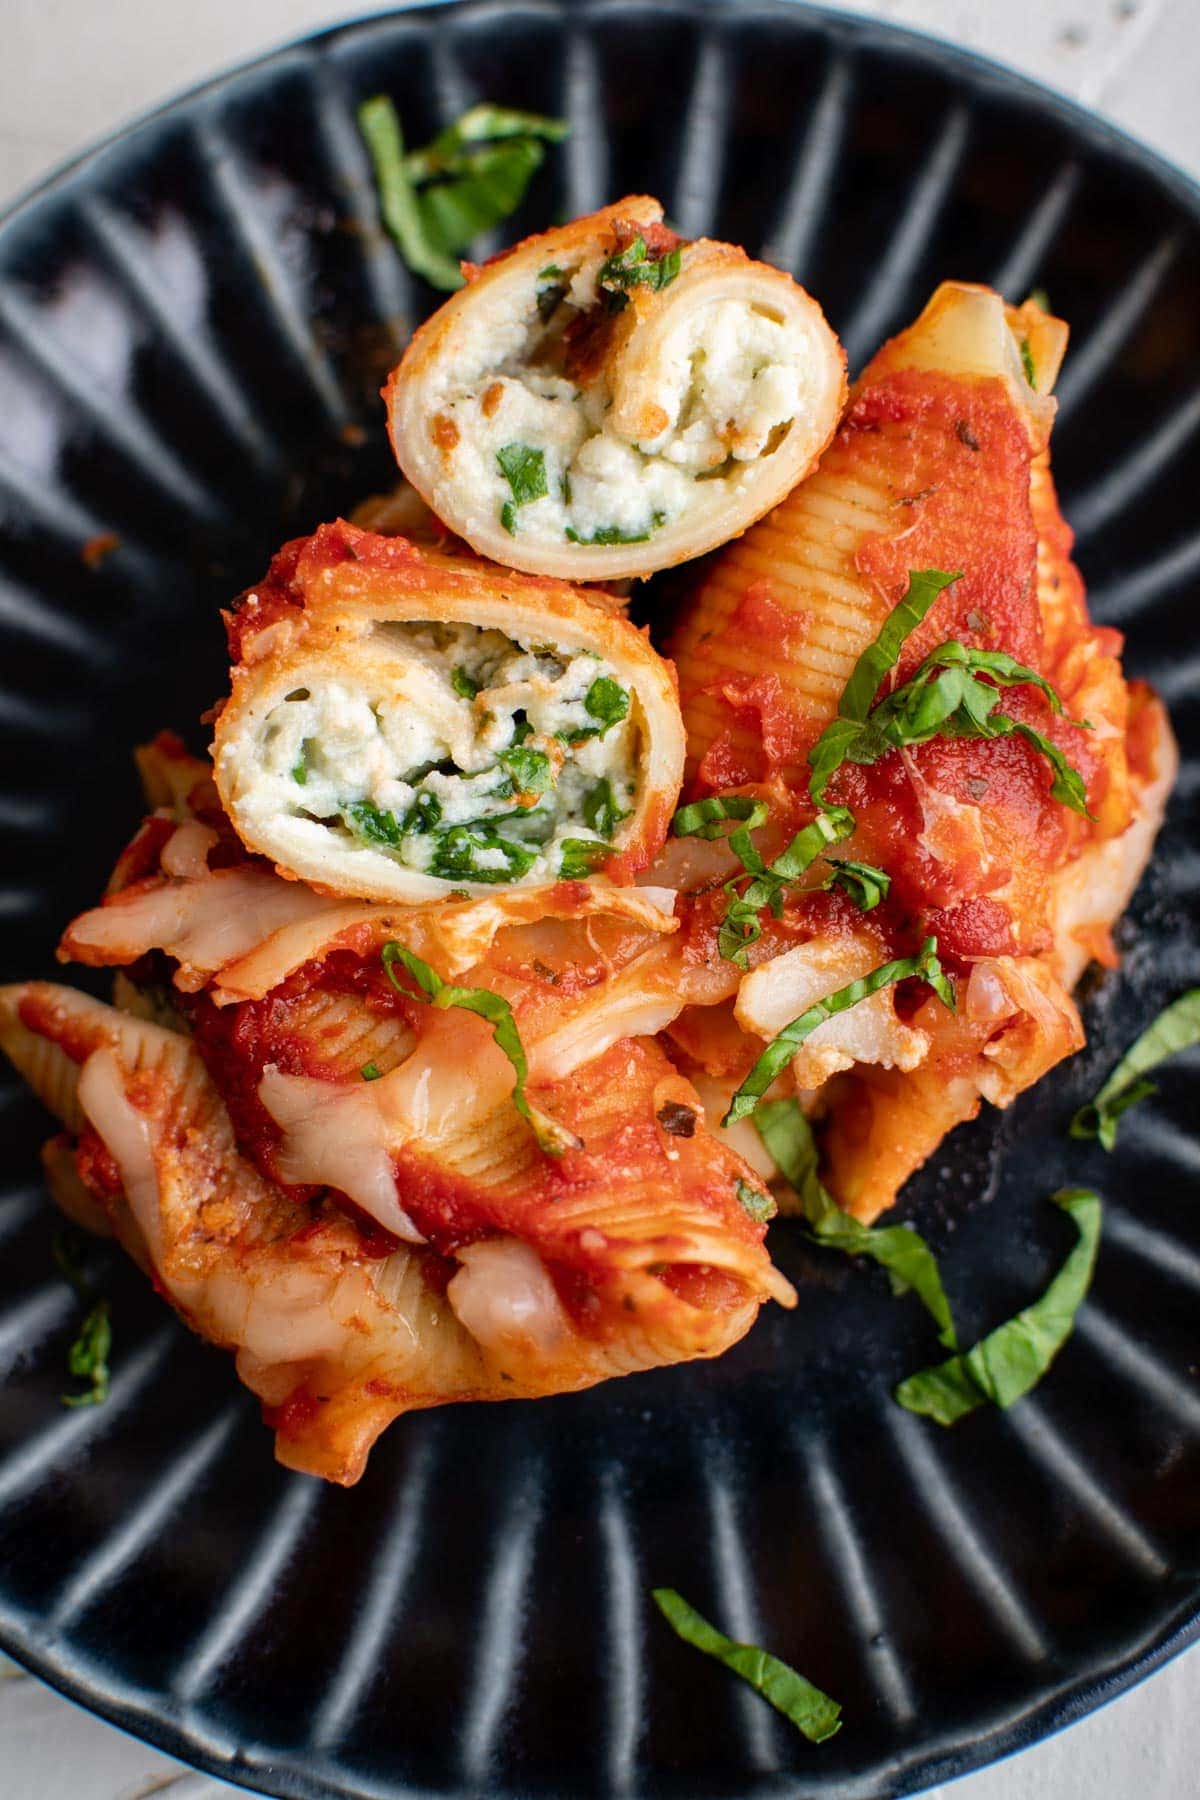 stuffed shells, spinach, basil, red sauce, cheese, black plate